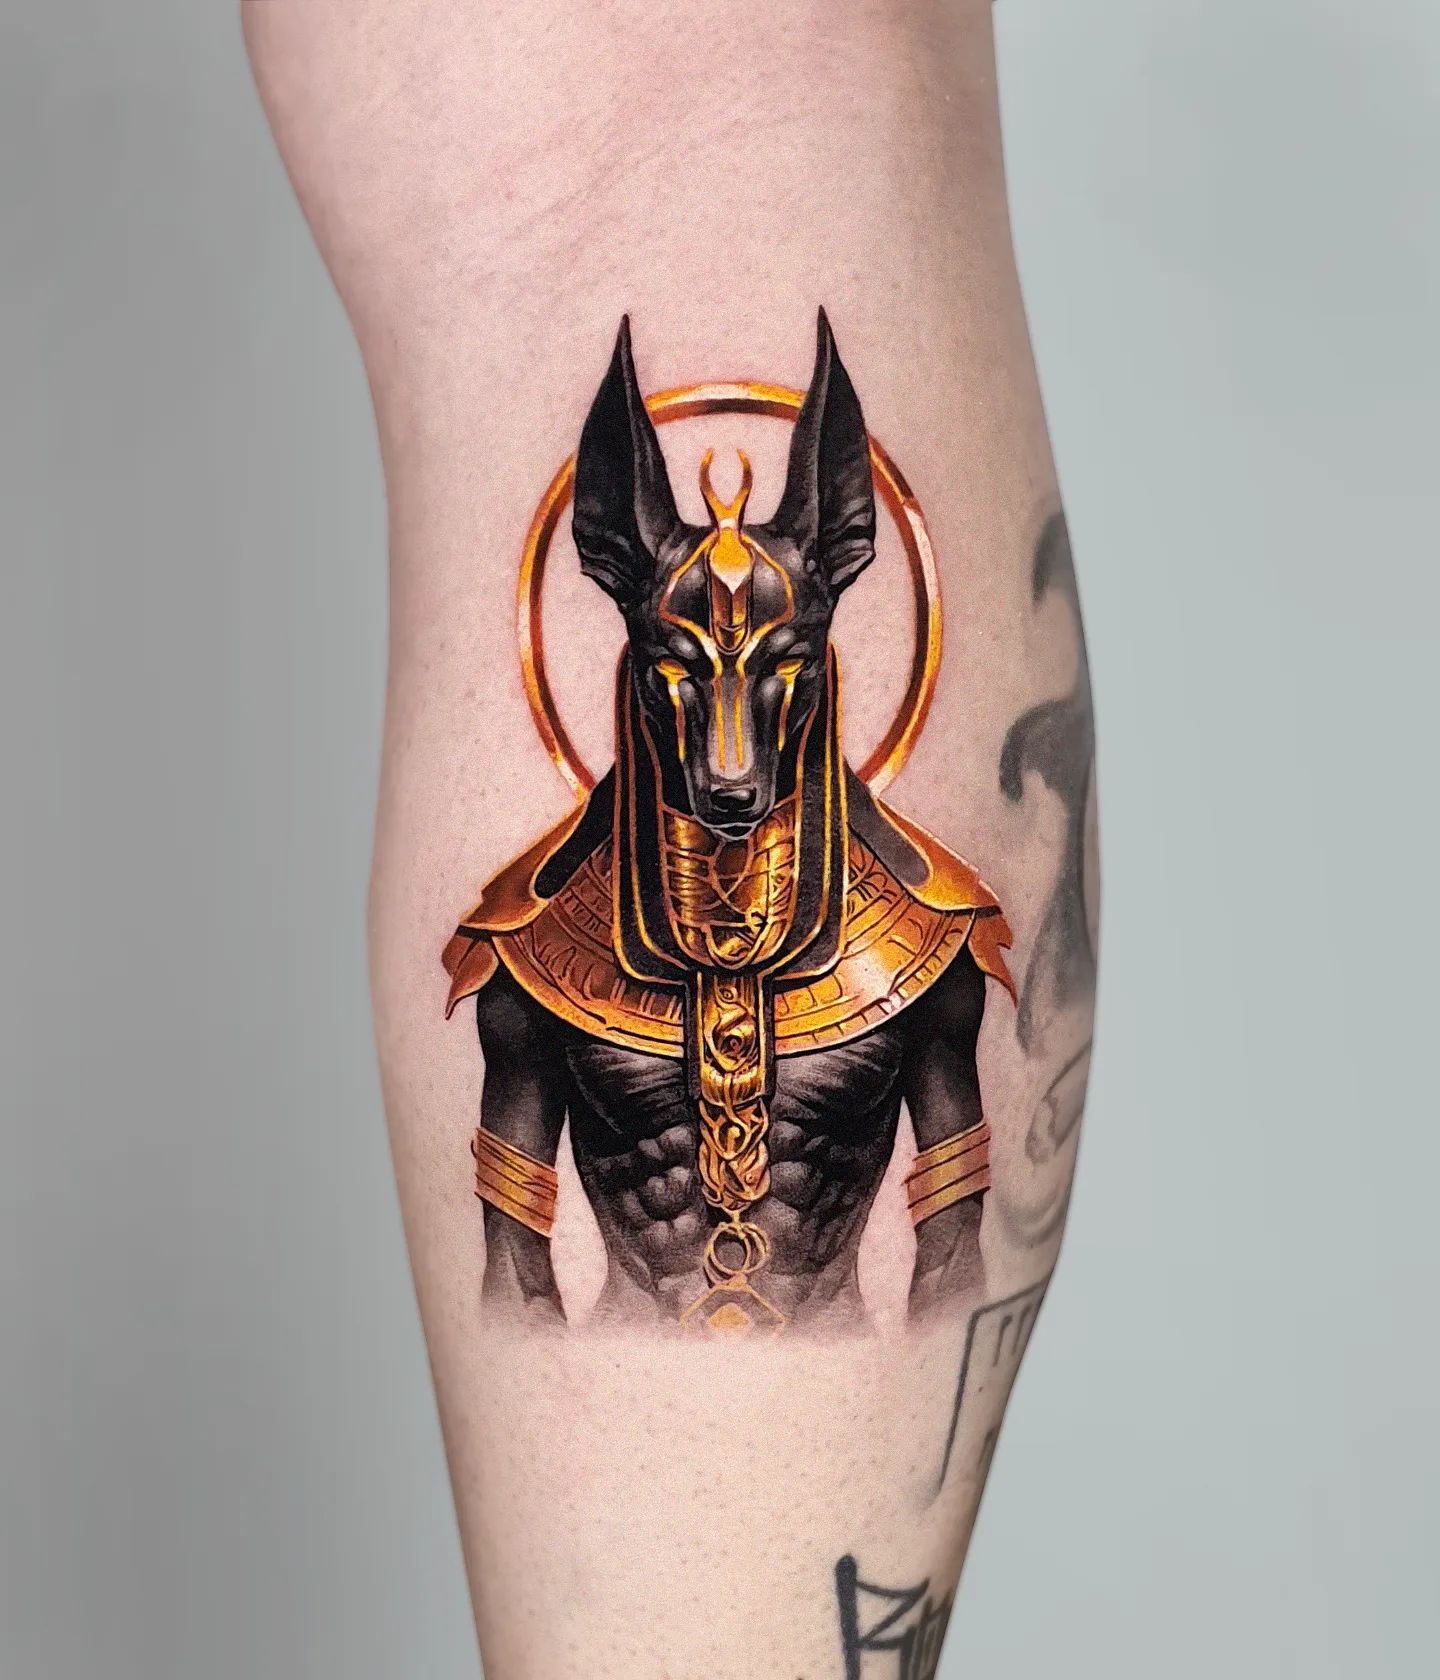 Inkden Tattoo Studio and Laser Removal Clinic - Anubis tattoo done by  Damian a week or so ago. This awesome piece will soon be extended onto the  chest. . We are pleased